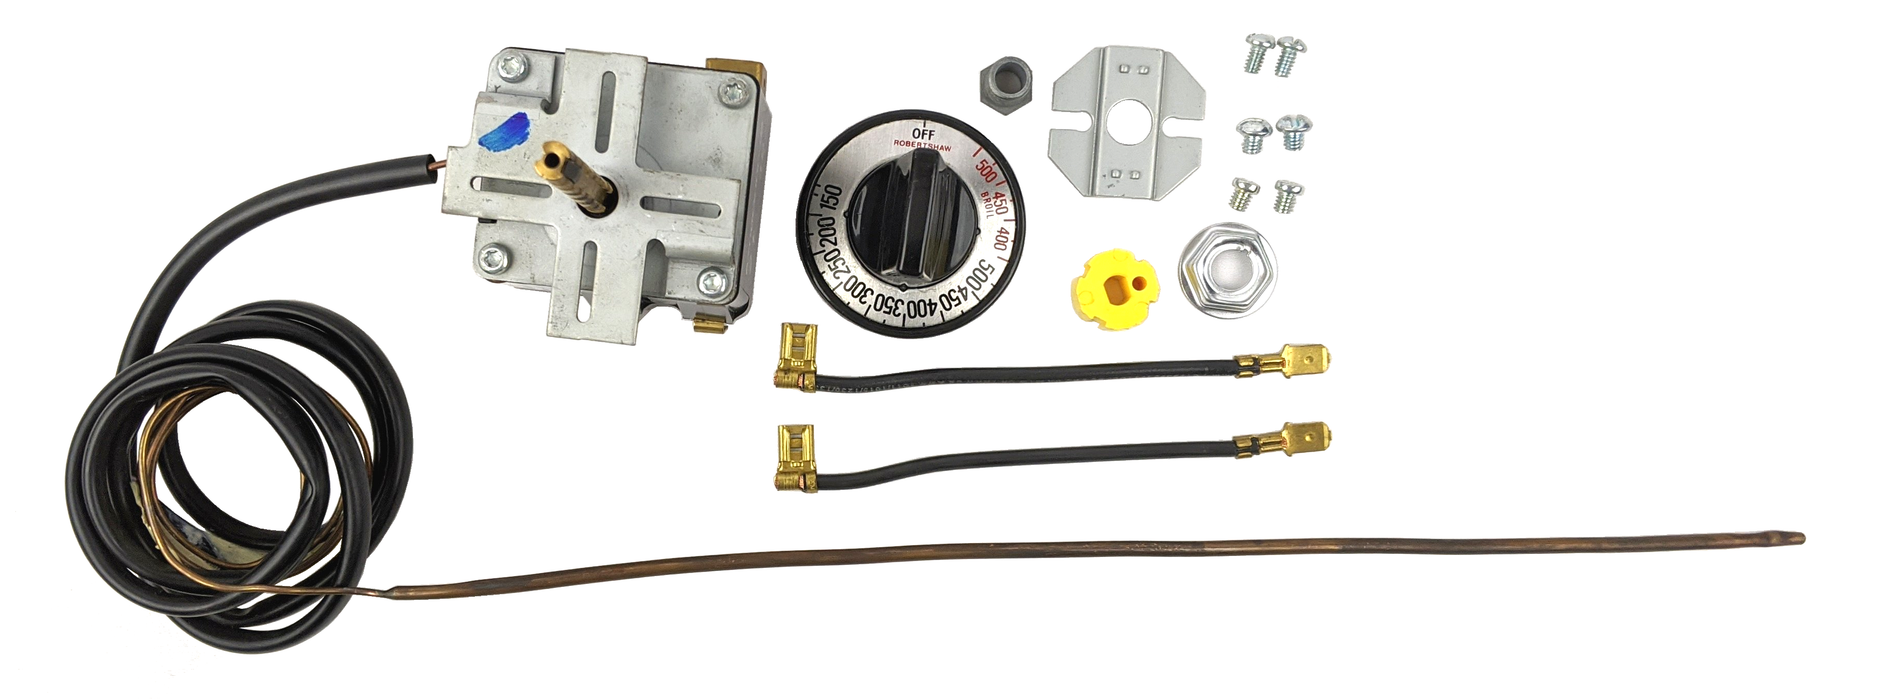 Robertshaw 6700G0001: Universal Electric Range Replacement Thermostat, 240VAC With Auto-Preheat, Variable Broil, and Pilot Light